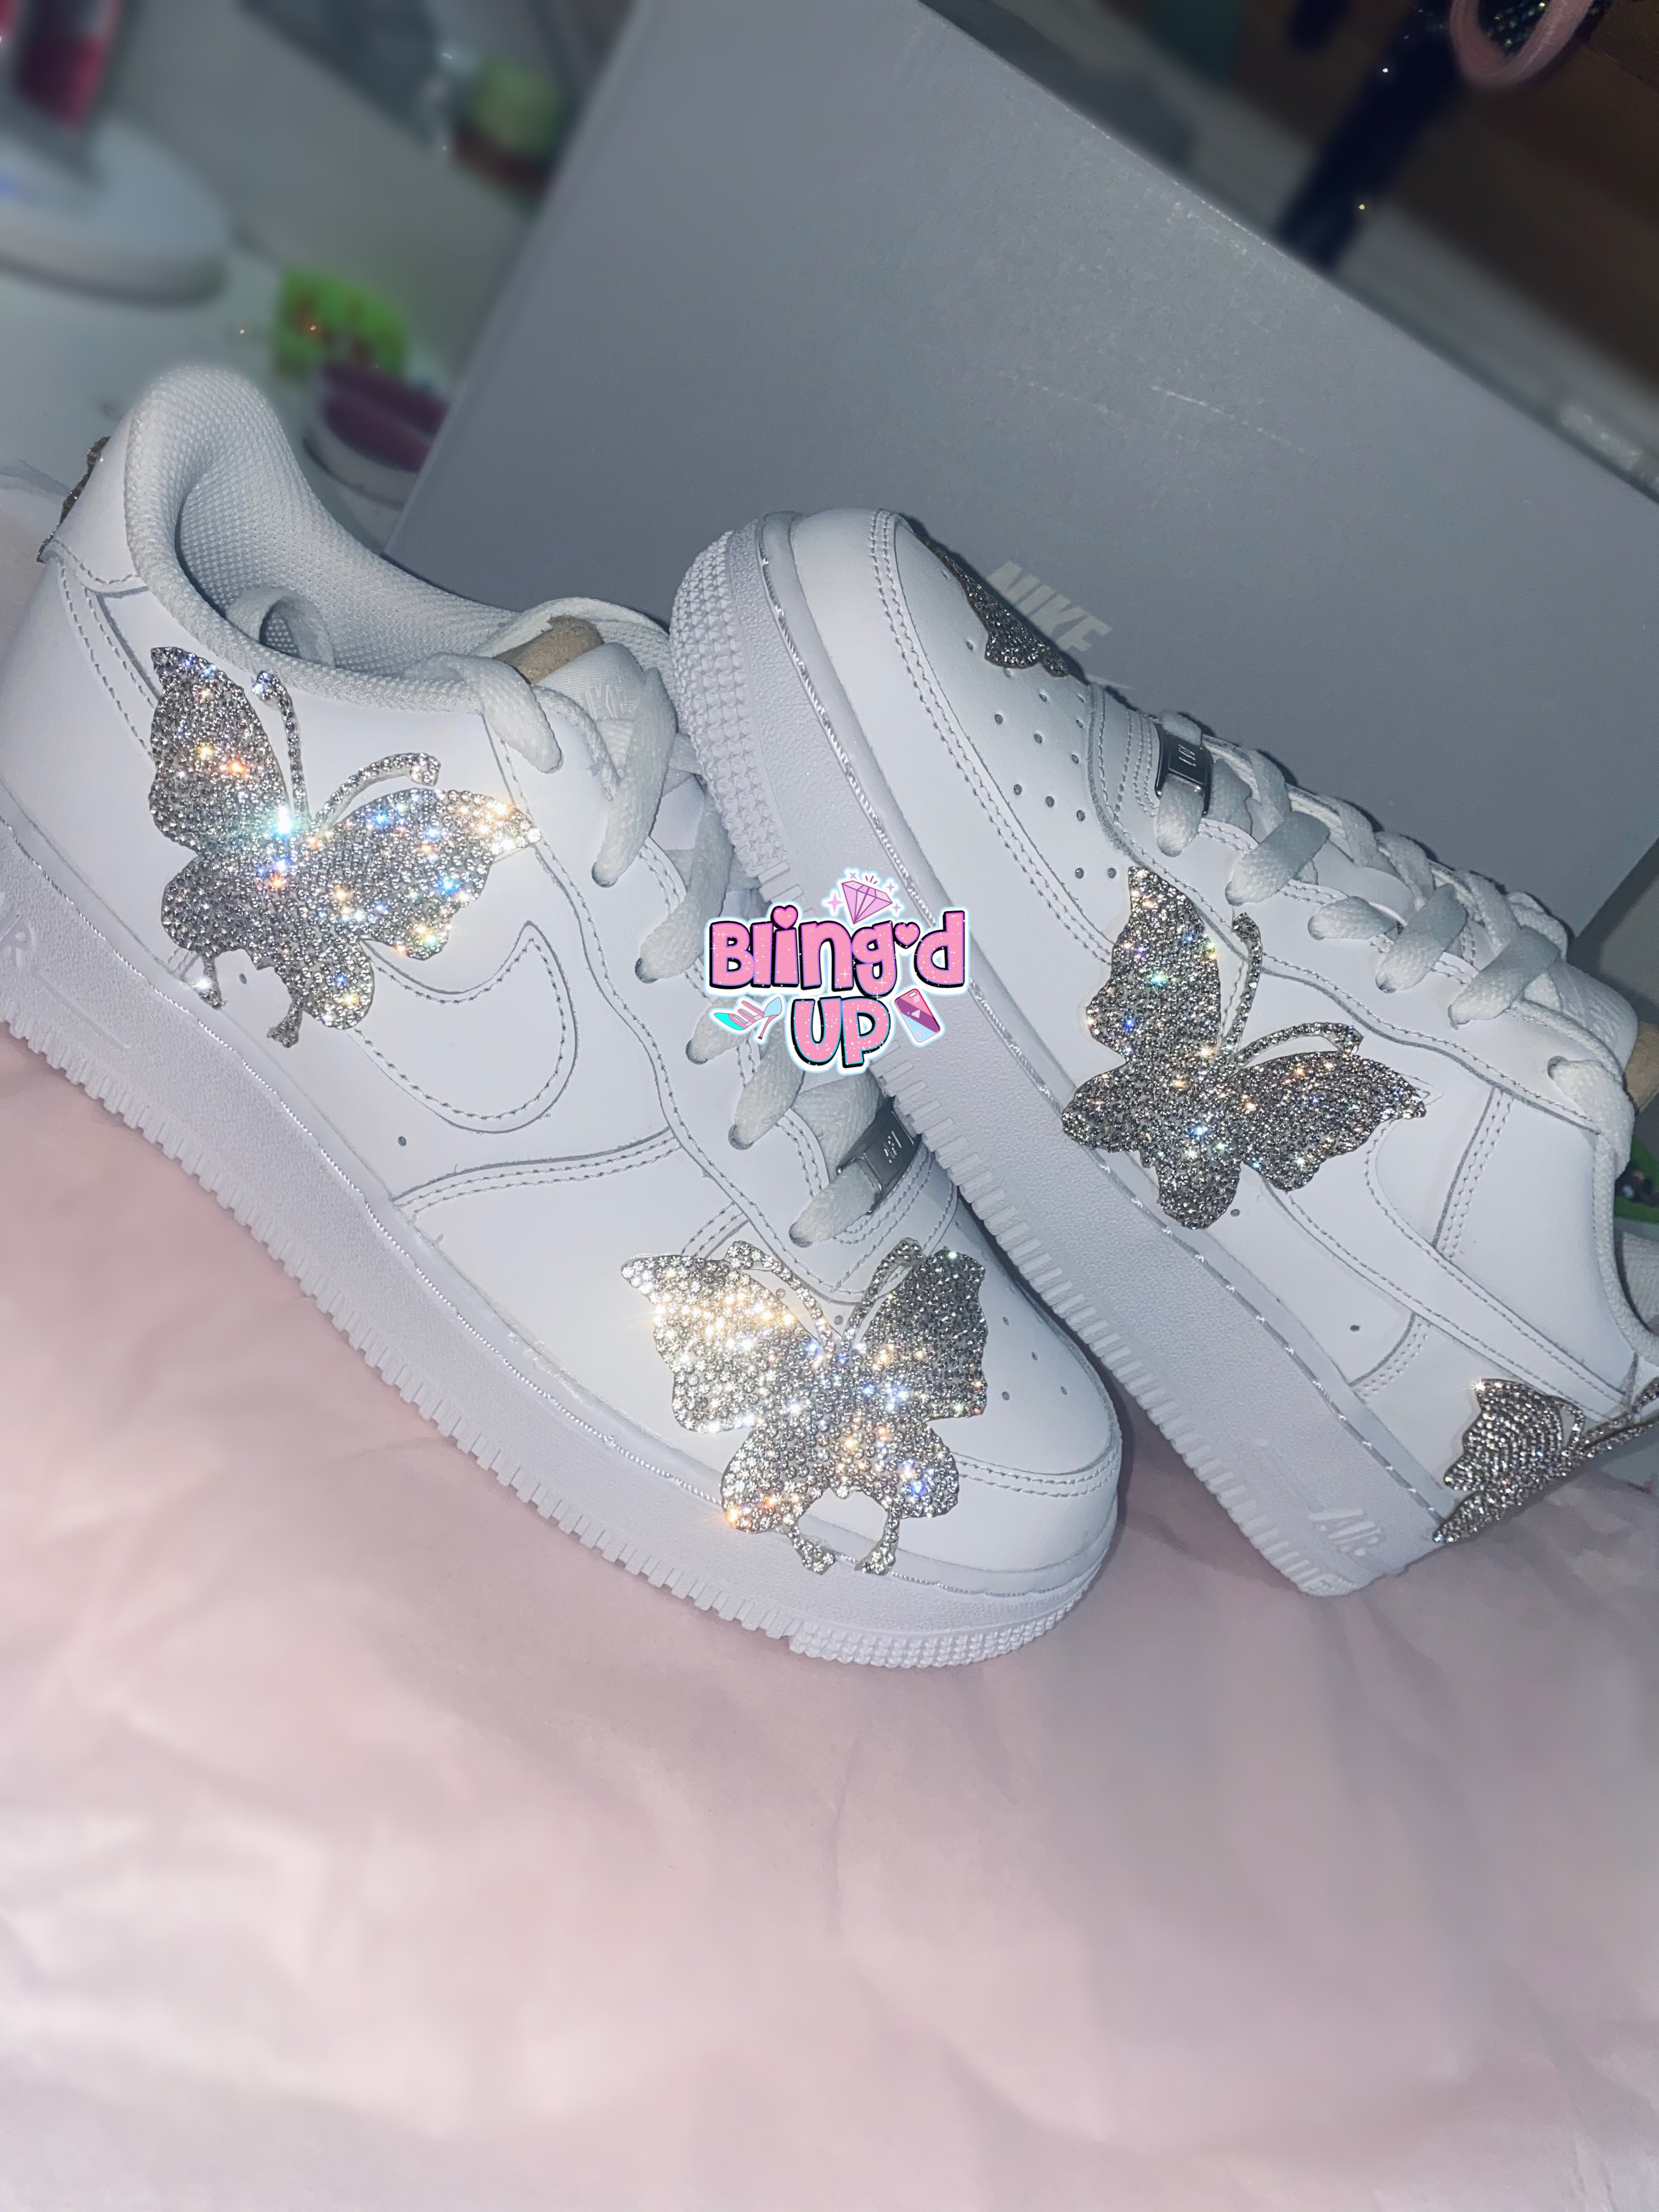 womens butterfly air force ones